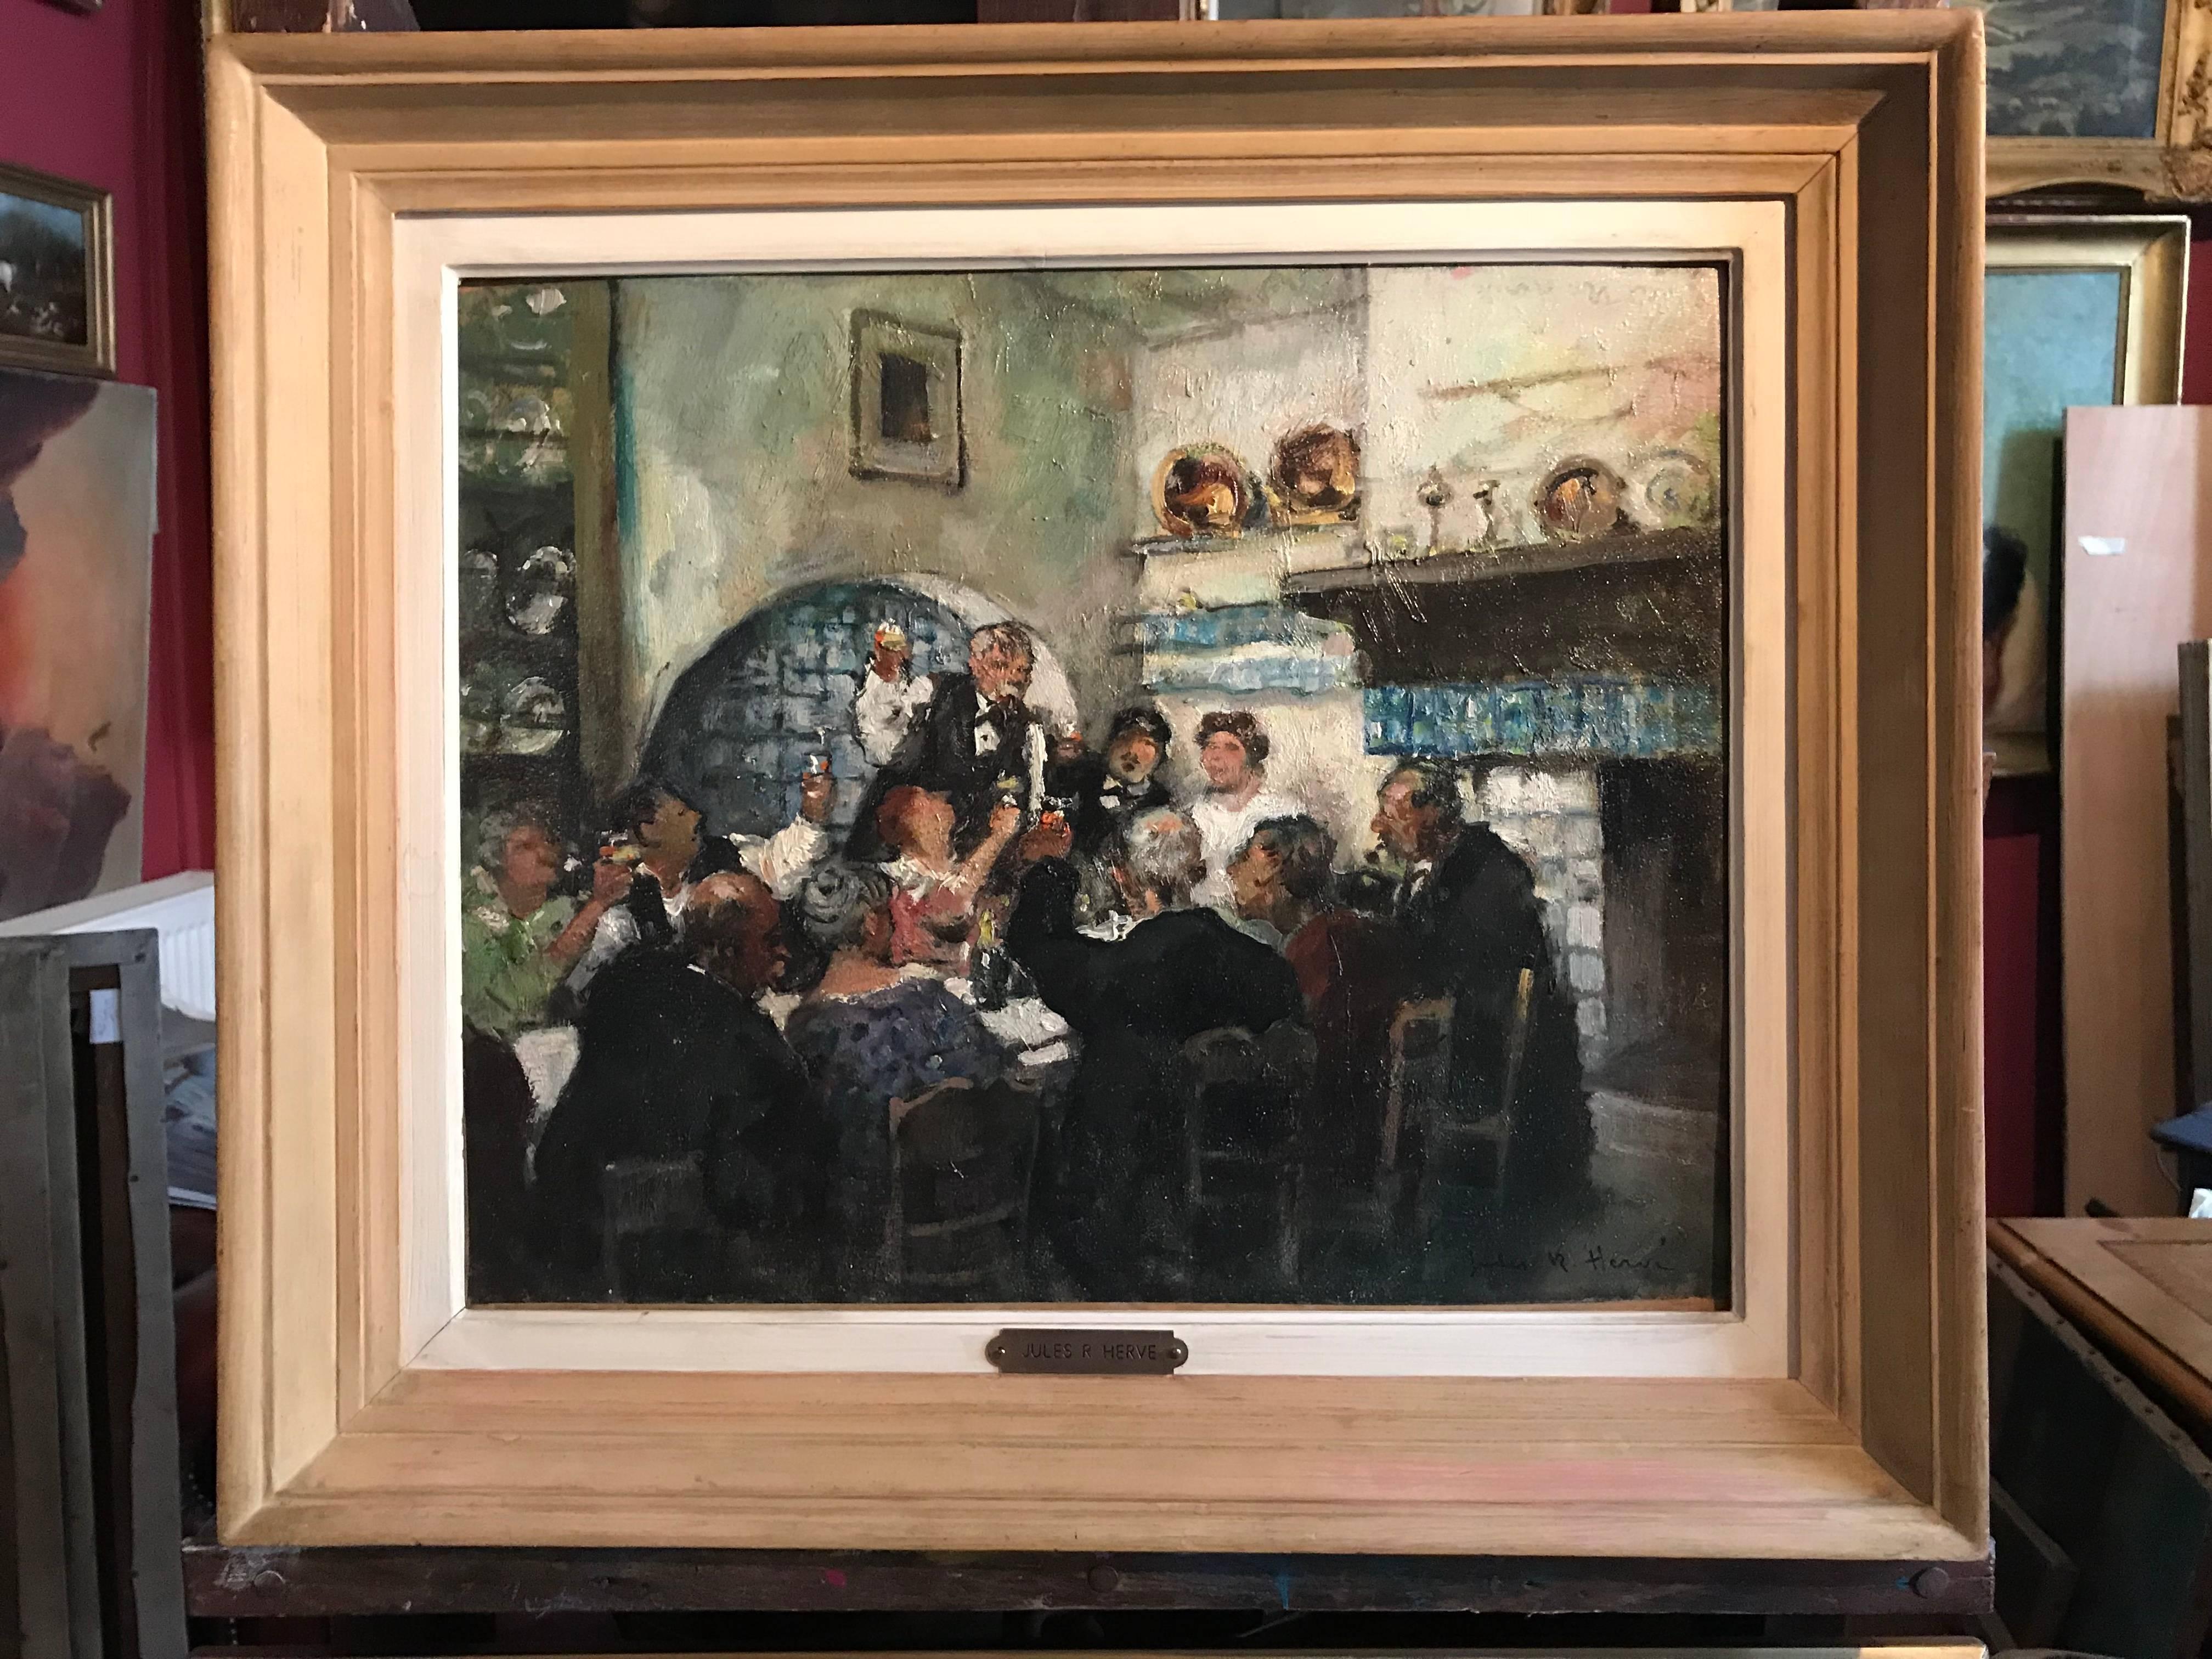 The Toast
by JULES RENÉ HERVÉ (French 1887-1981) 
signed lower right corner
oil painting on board, 14.75 x 18.5 inches
framed

Very fine original oil painting on canvas by the well listed and popular French artist, Jules René Hervé (1887-1981). The